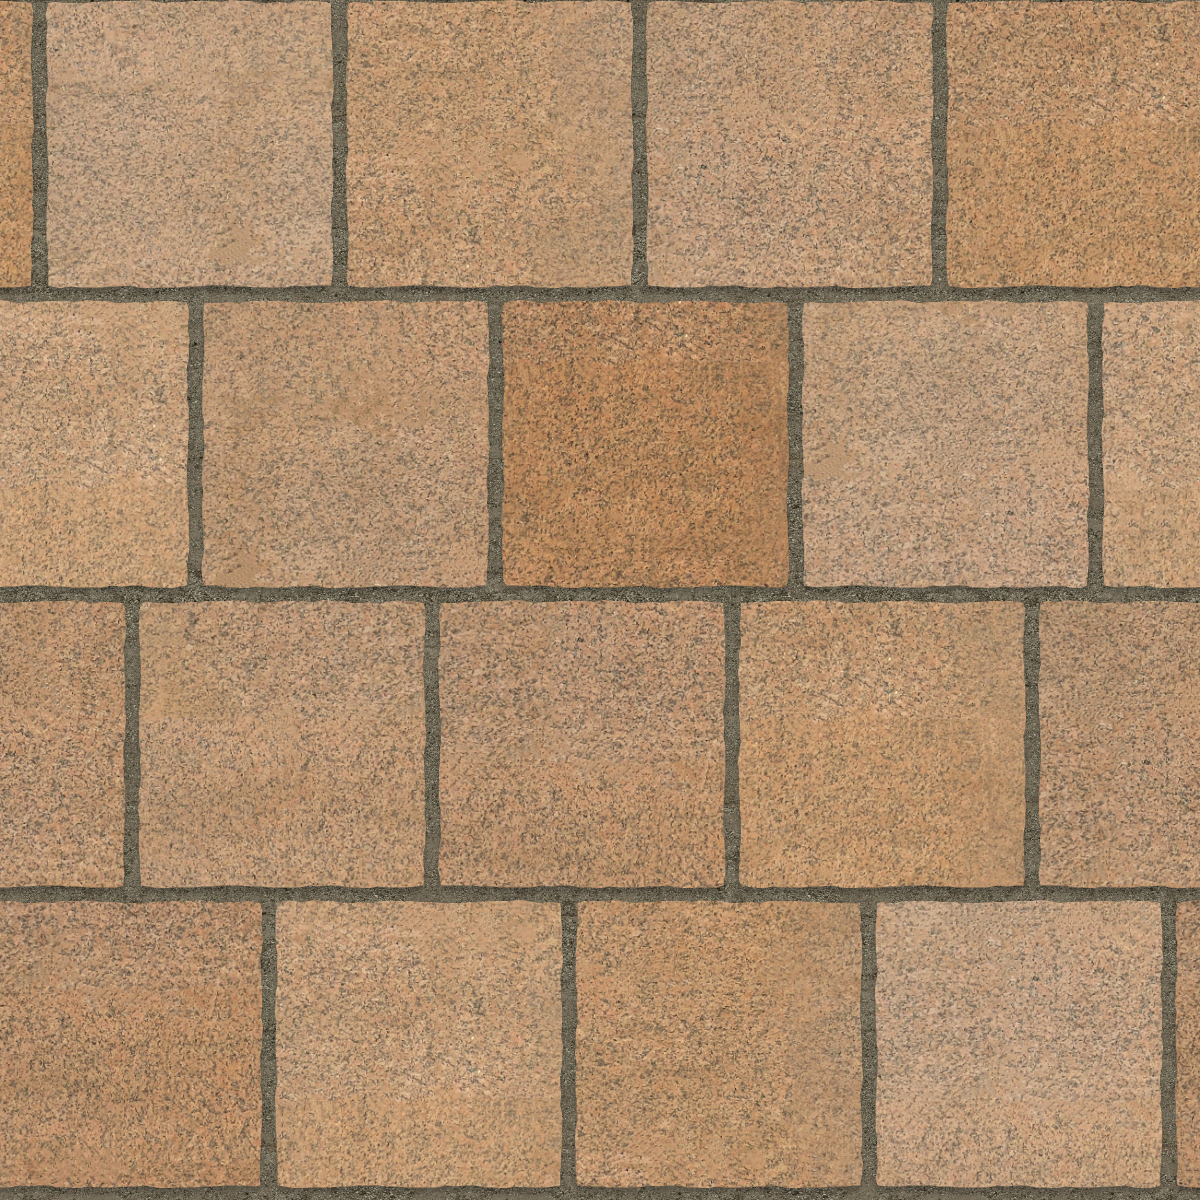 A seamless stone texture with pink granite blocks arranged in a Staggered pattern